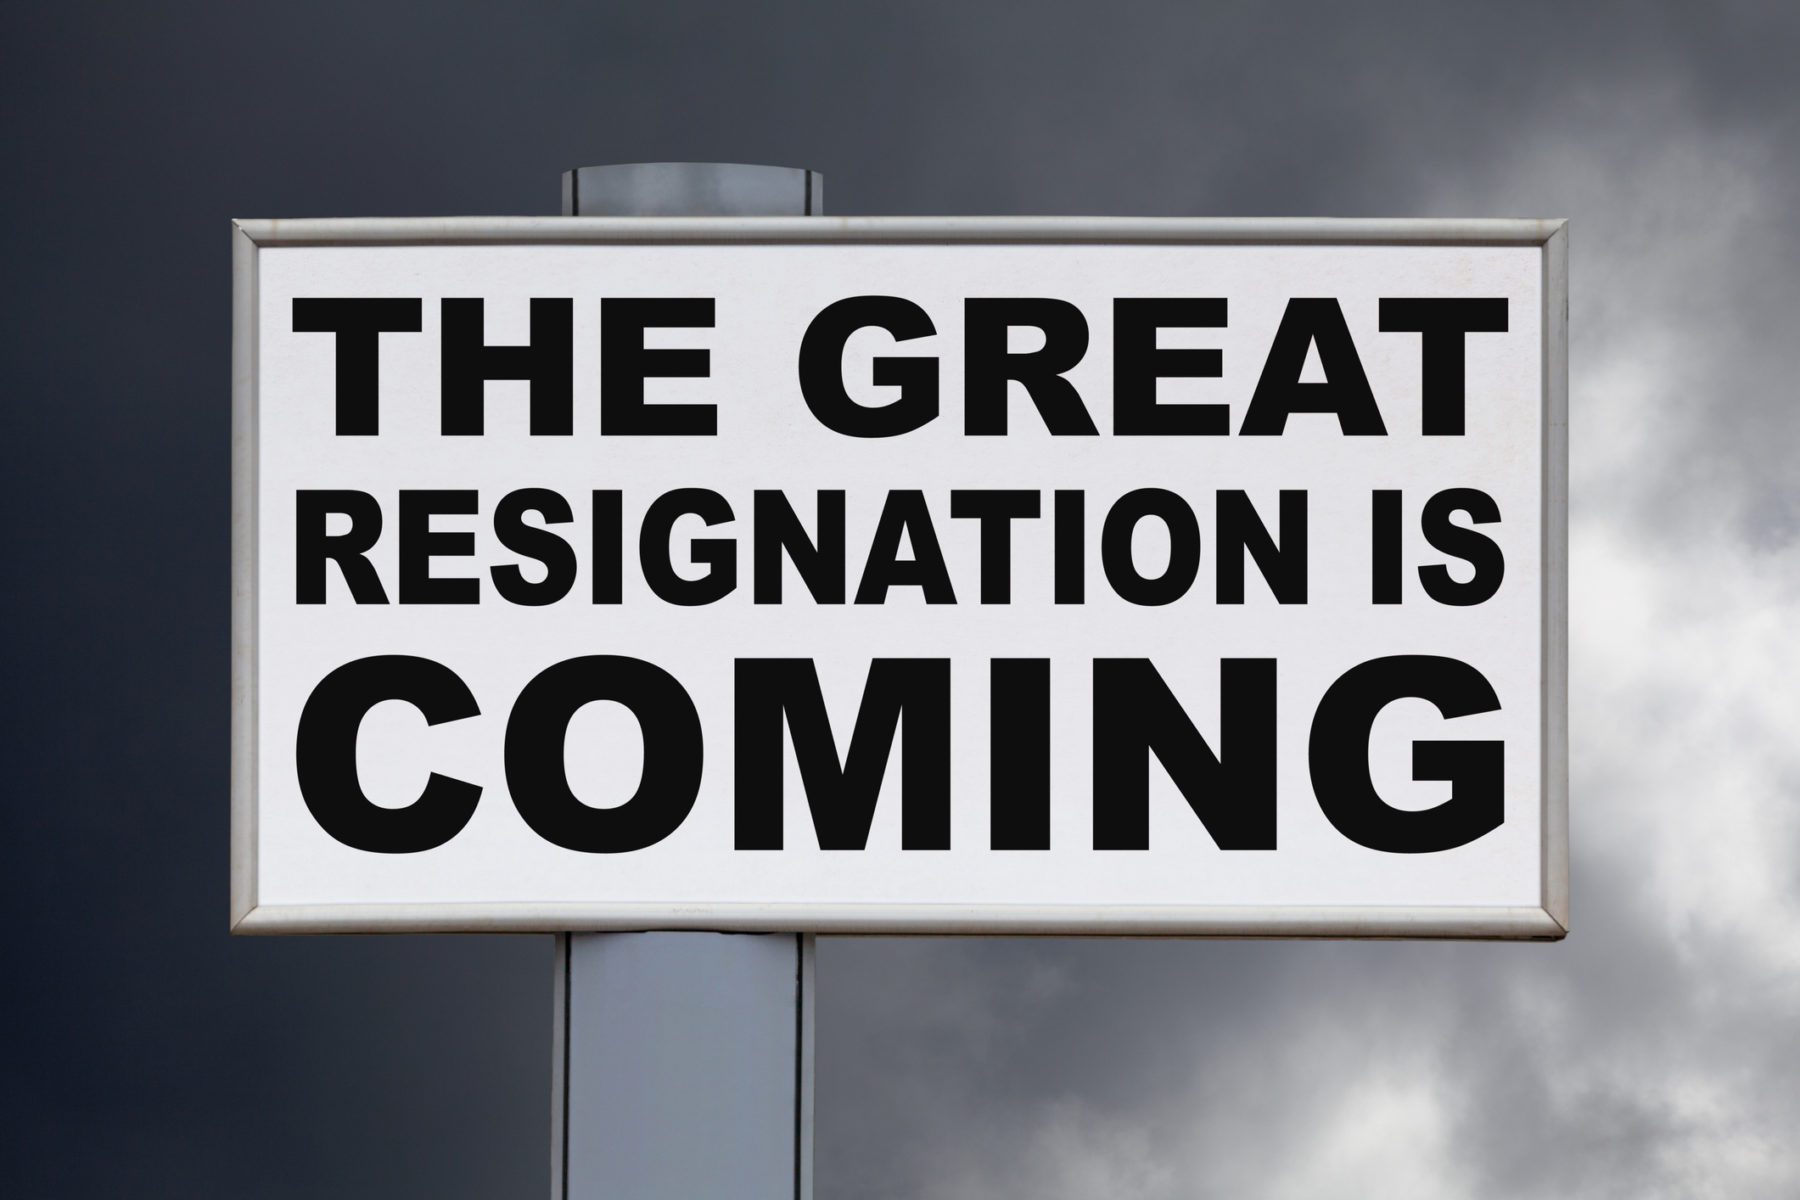 The great resignation is coming - Billboard sign